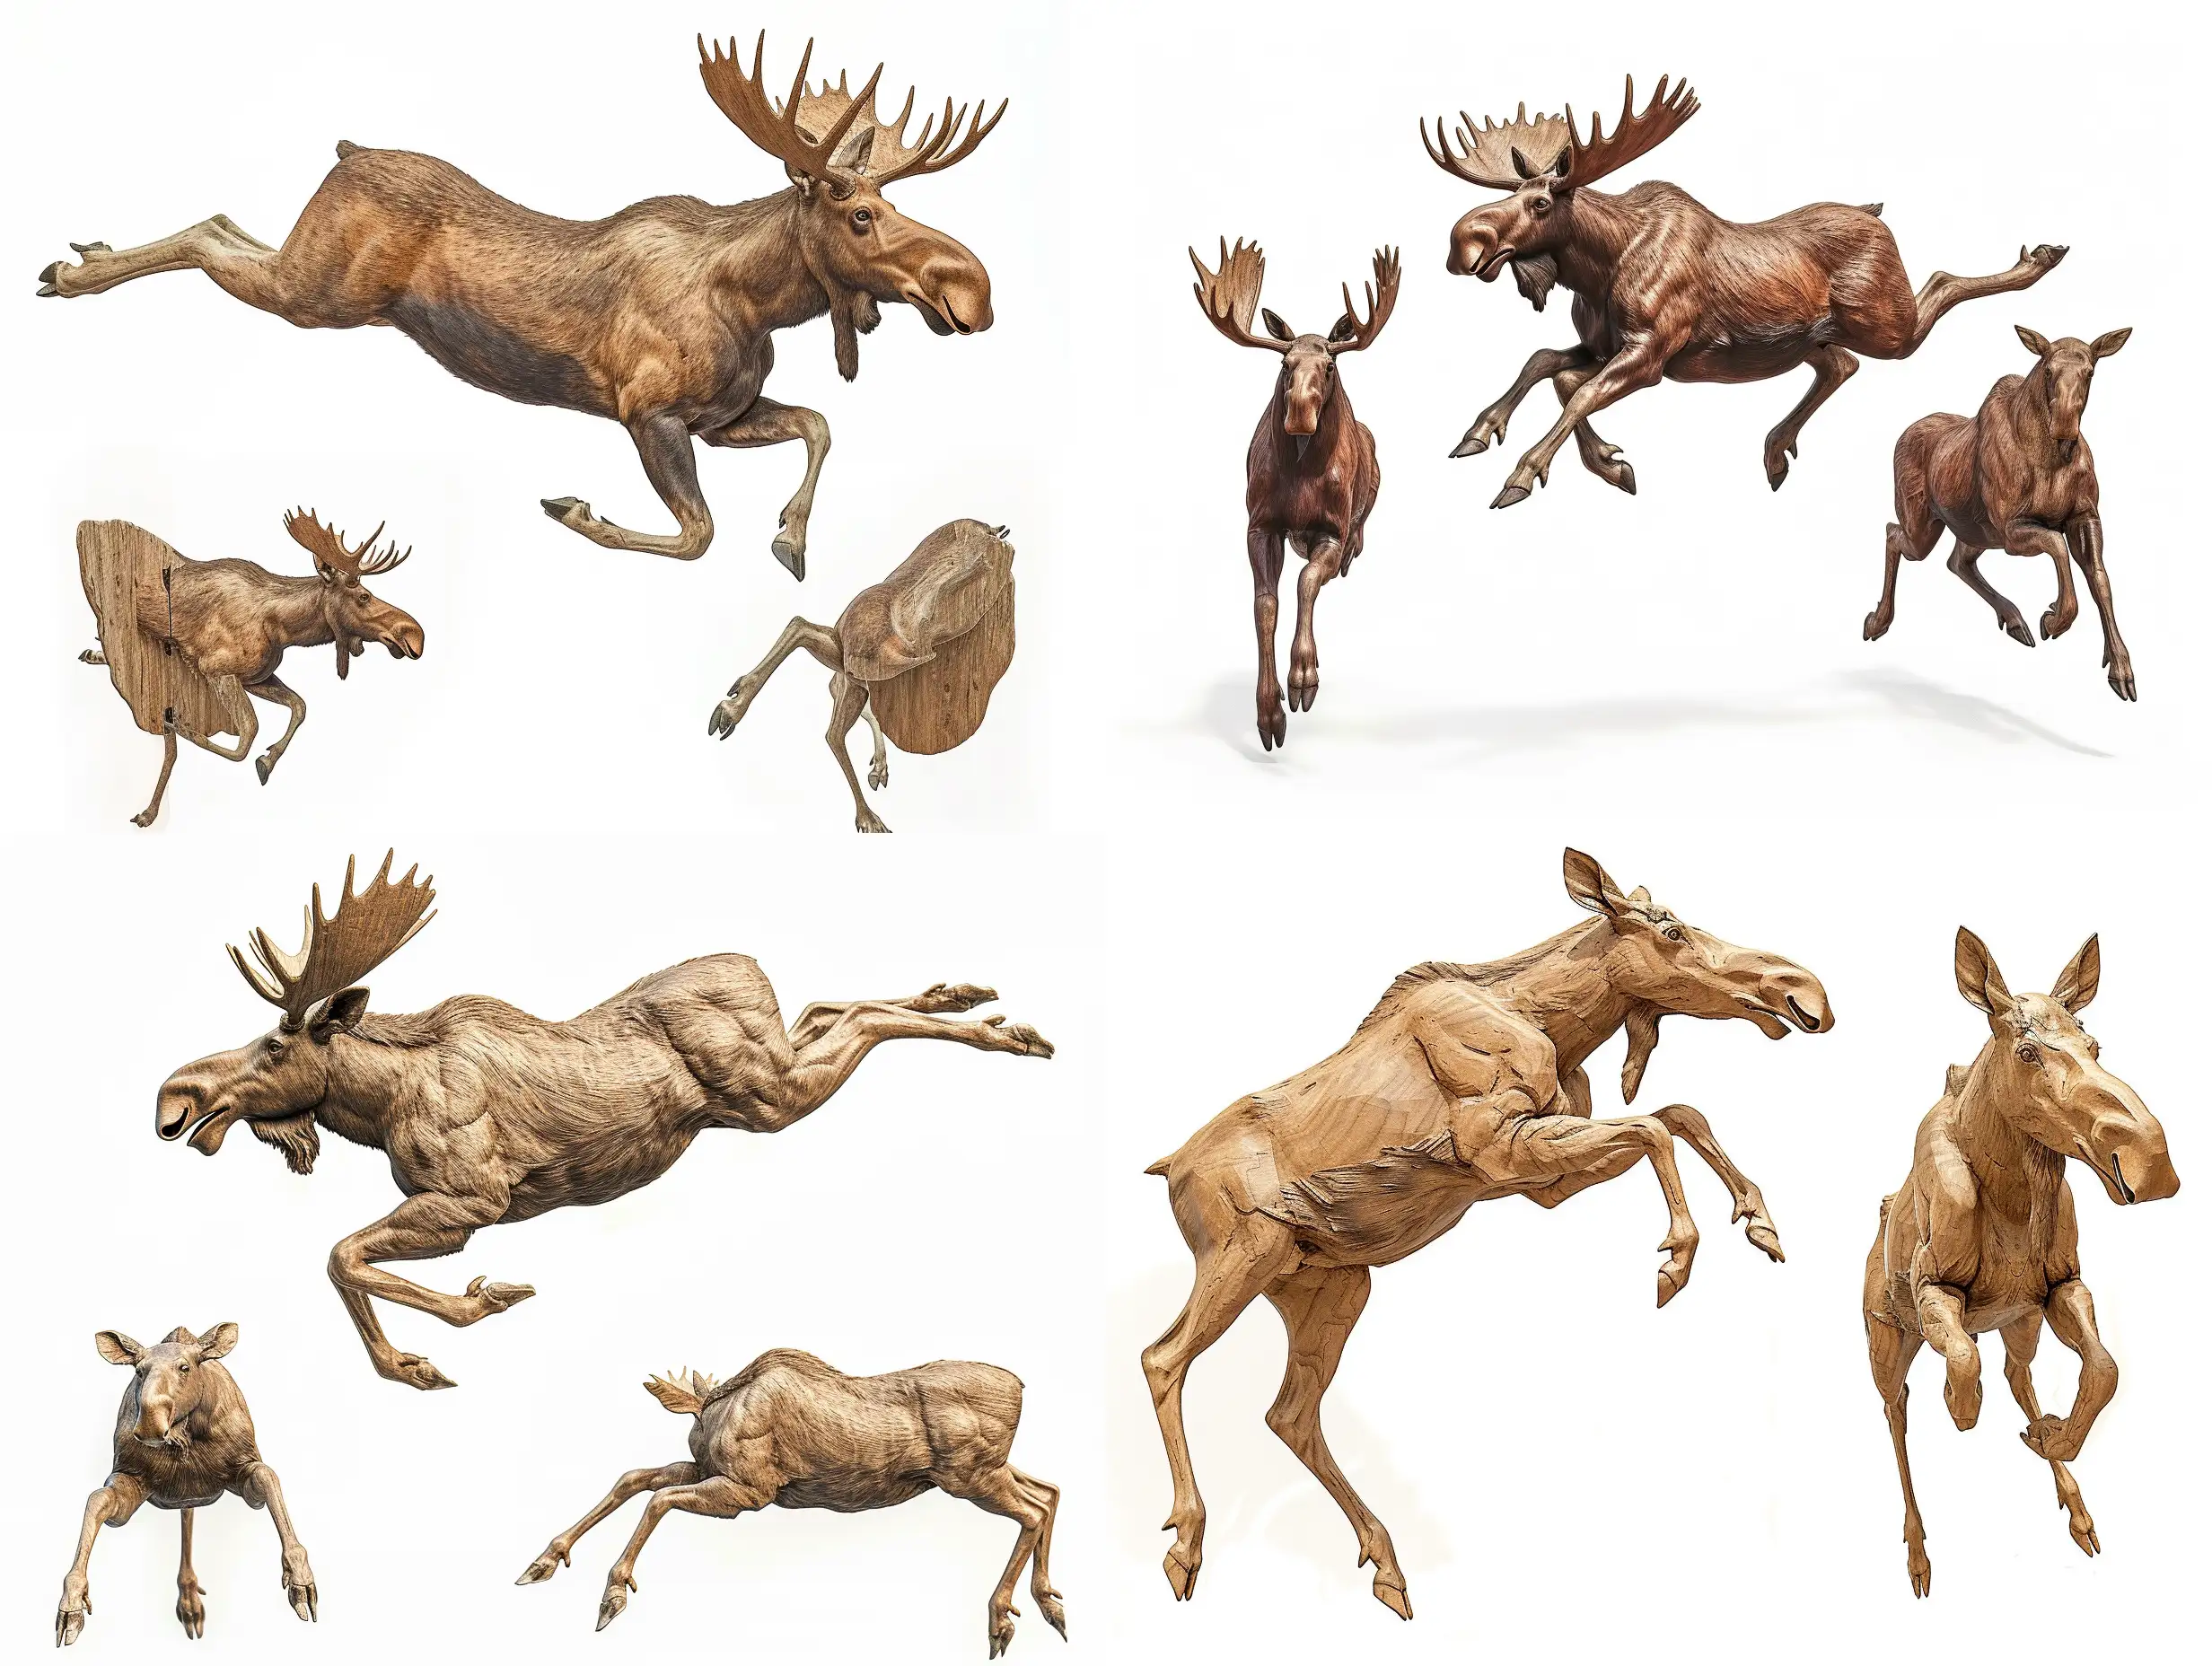 Realistic-Wooden-Moose-Sculpture-Dynamic-Jumping-Pose